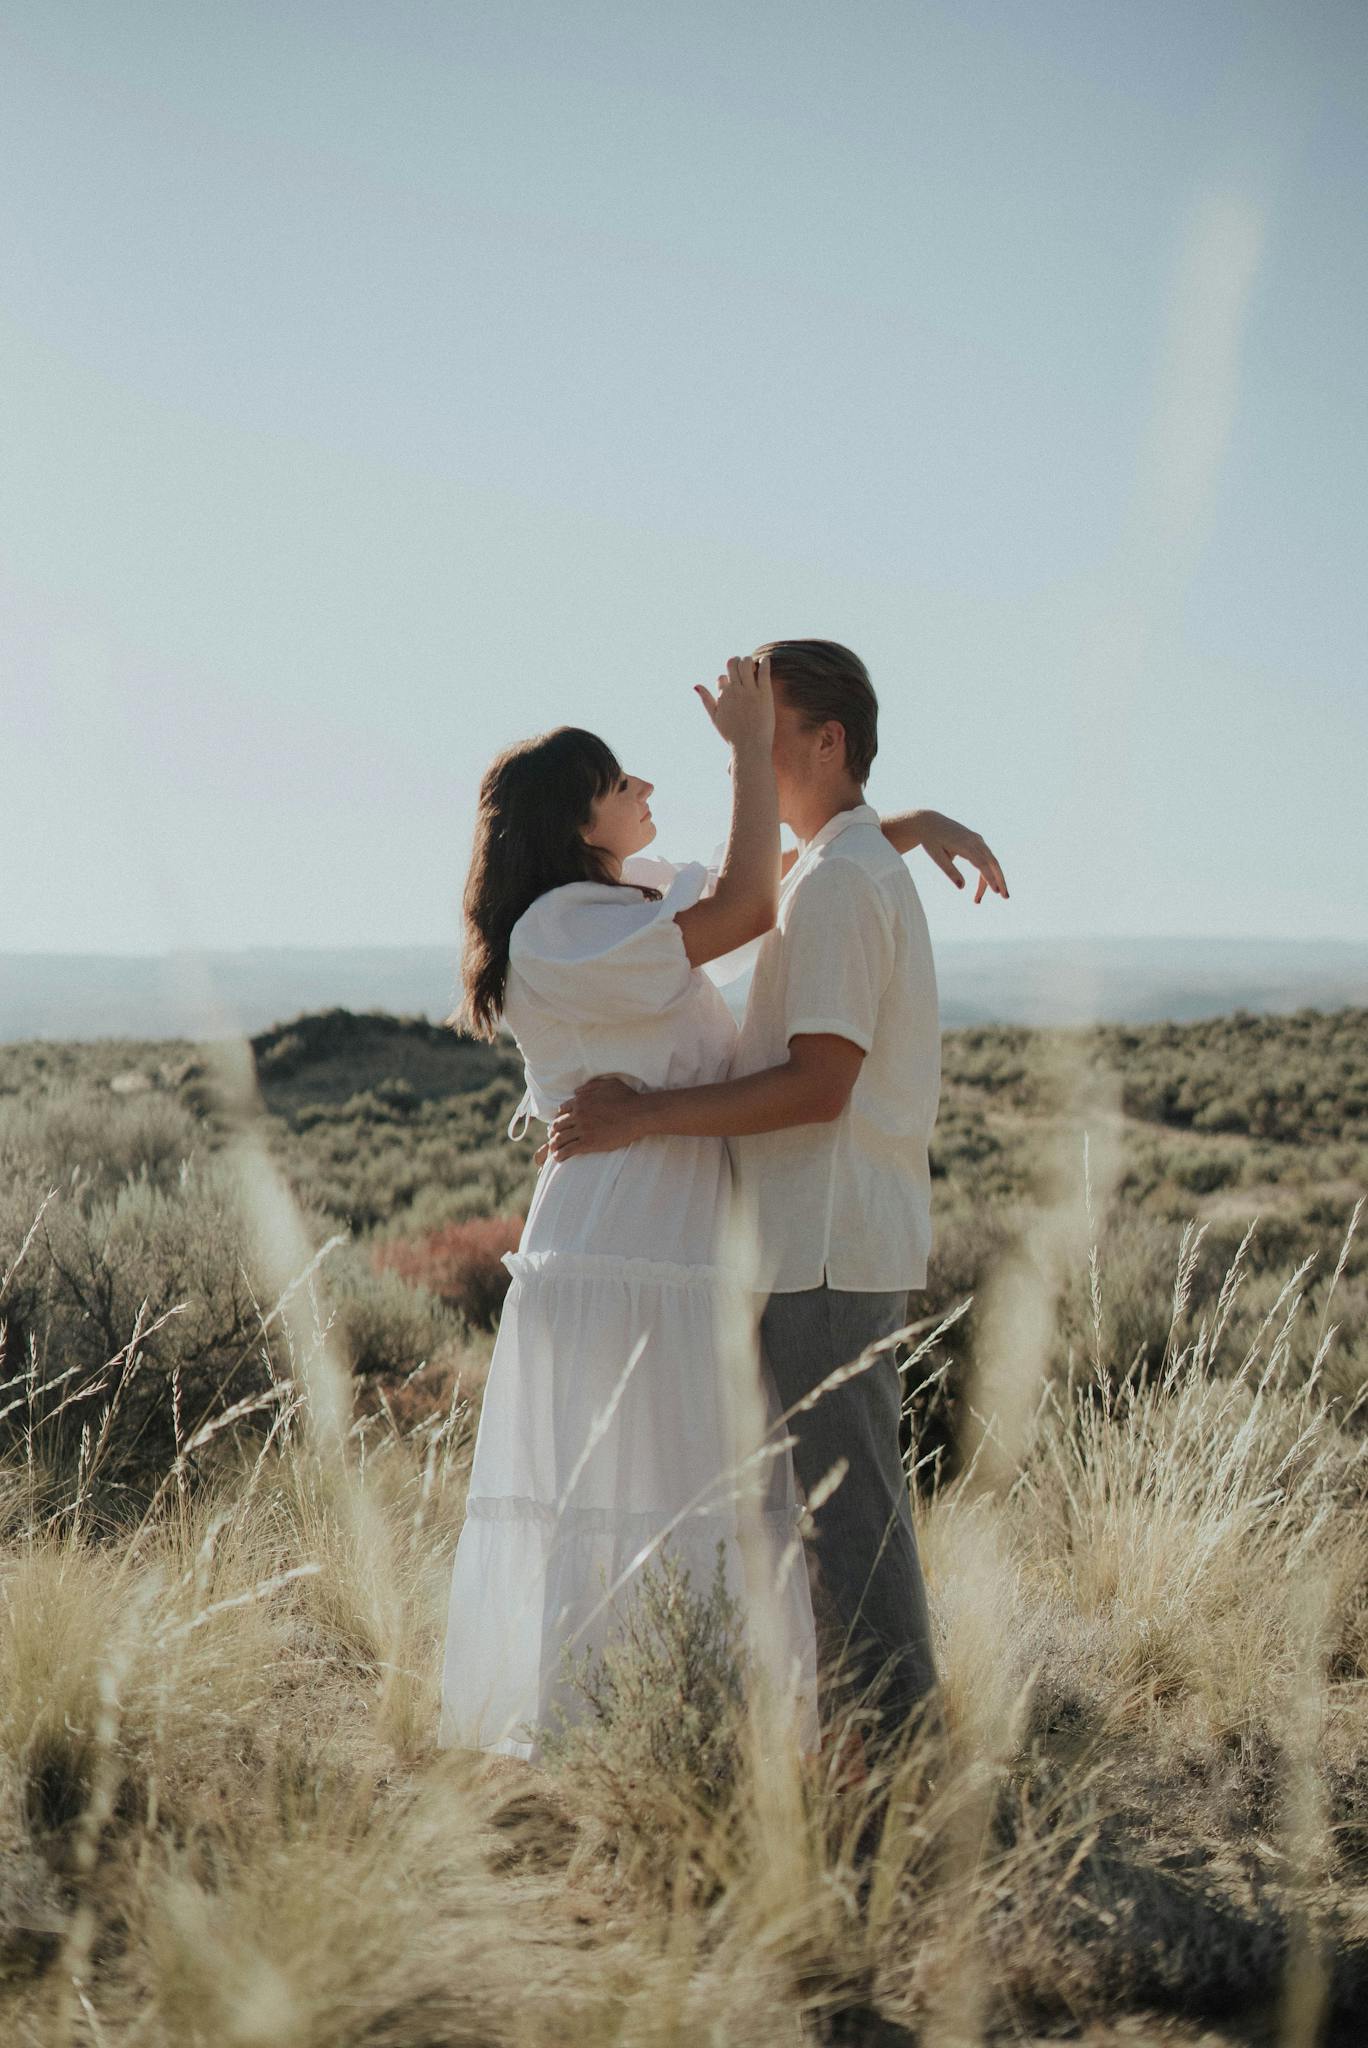 Happy couple in stylish outfits embracing in nature in sunny day